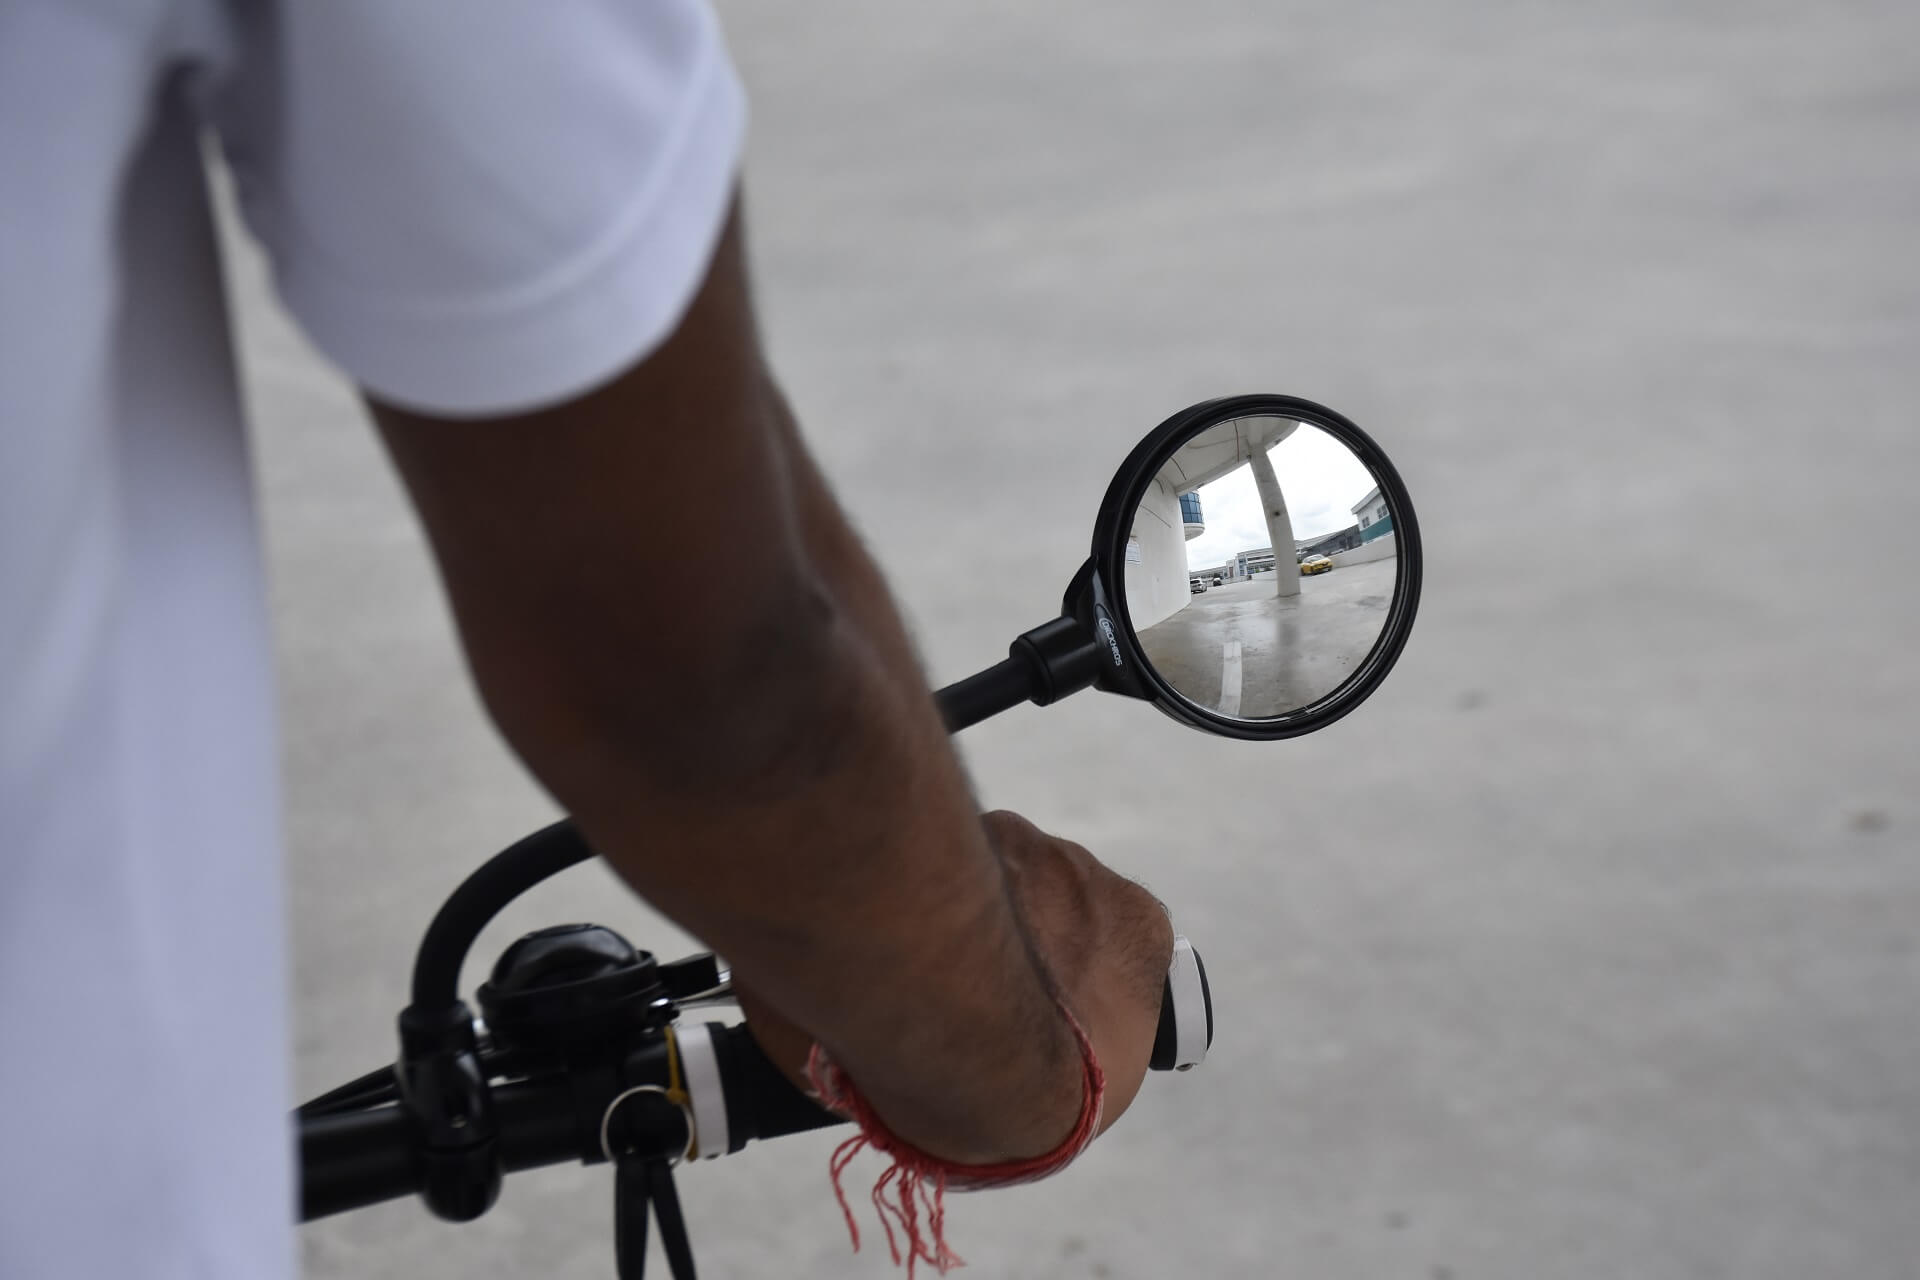 ebike accessories ebike flexible side mirror - Top 5 ebike accessories you must have before you hit the roads